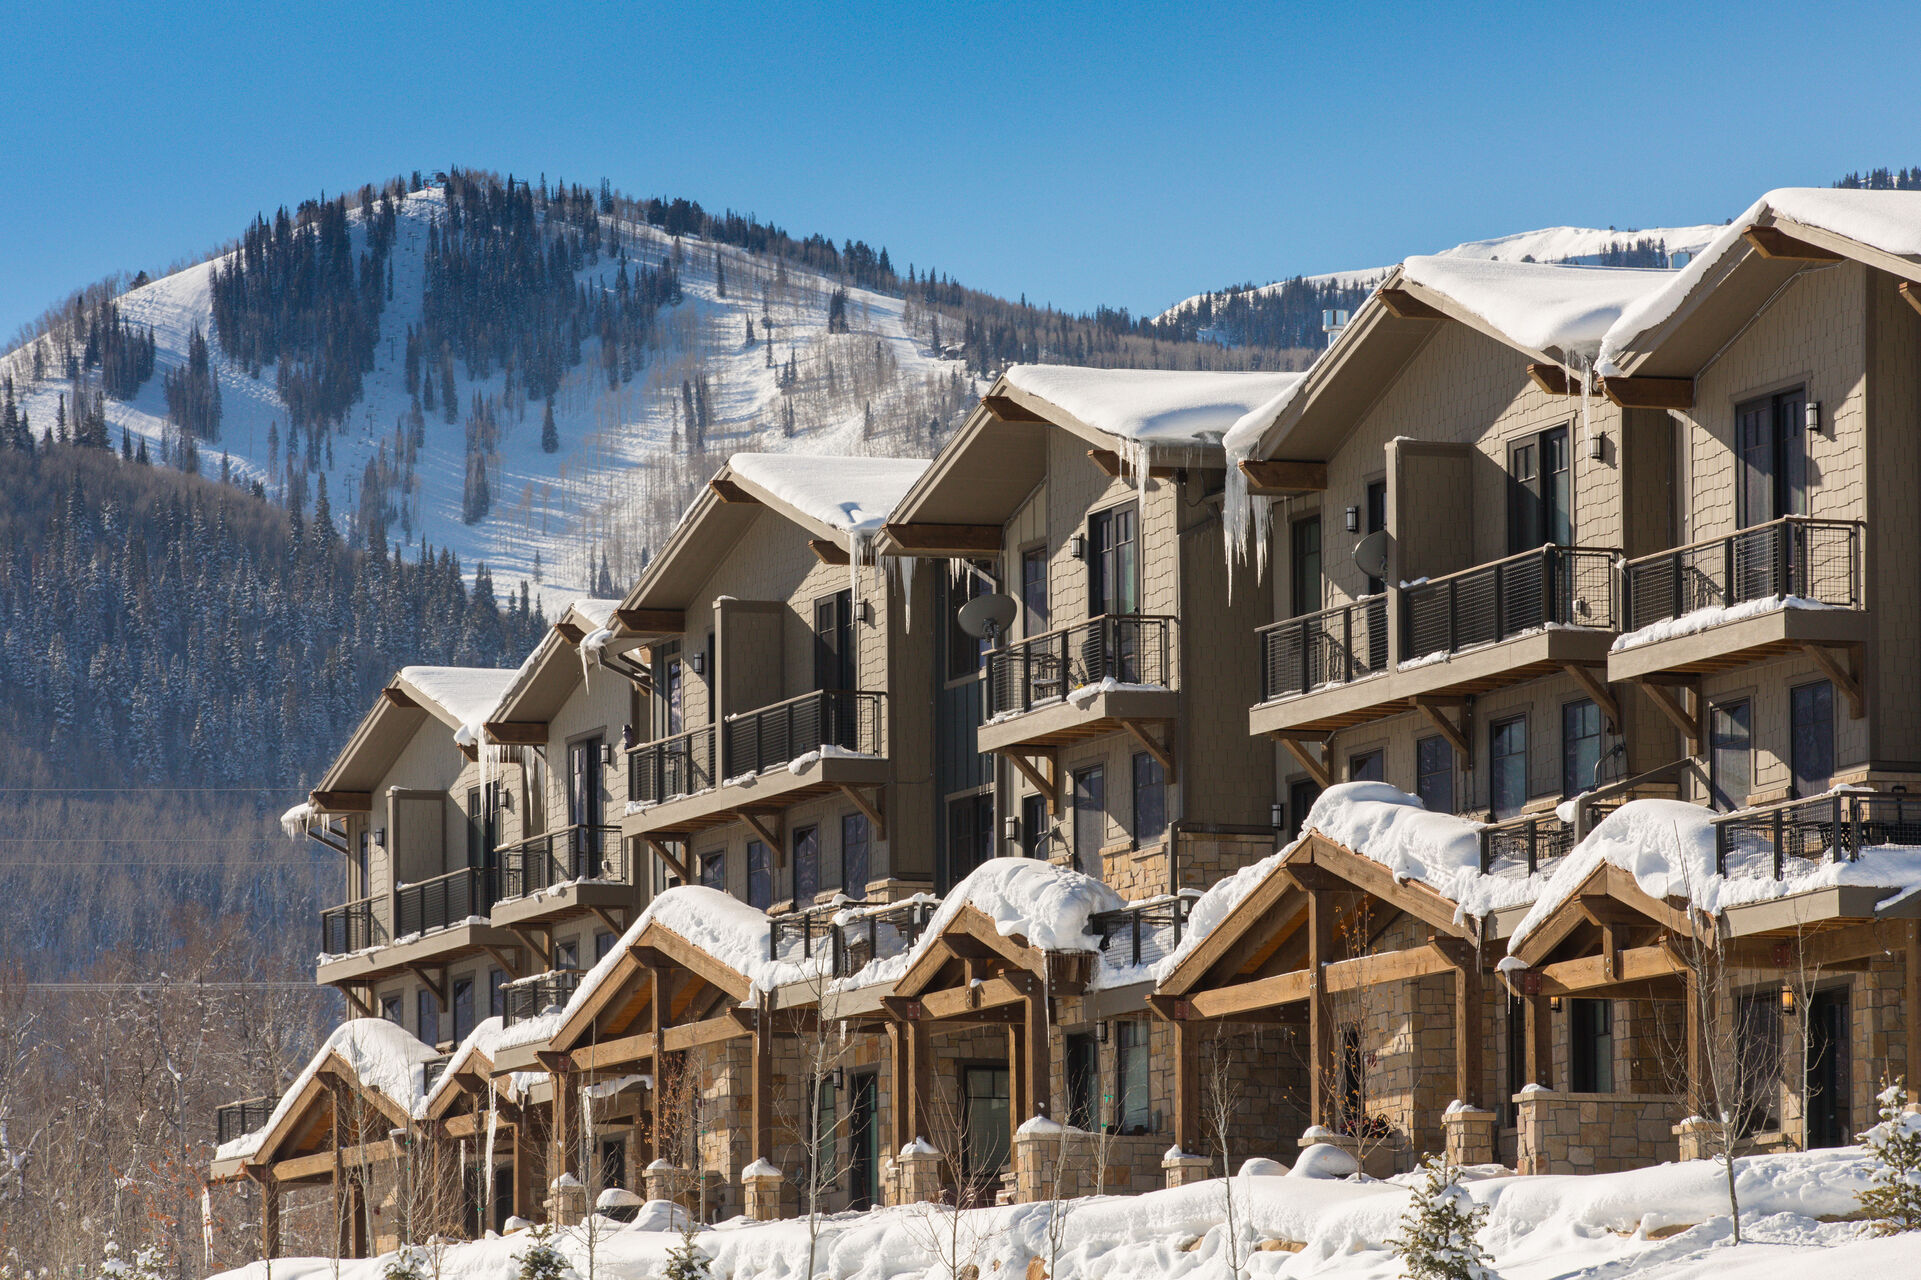 Located Across from the Canyons Cabriolet that will Take You to the Canyons Village Base and Ski Access